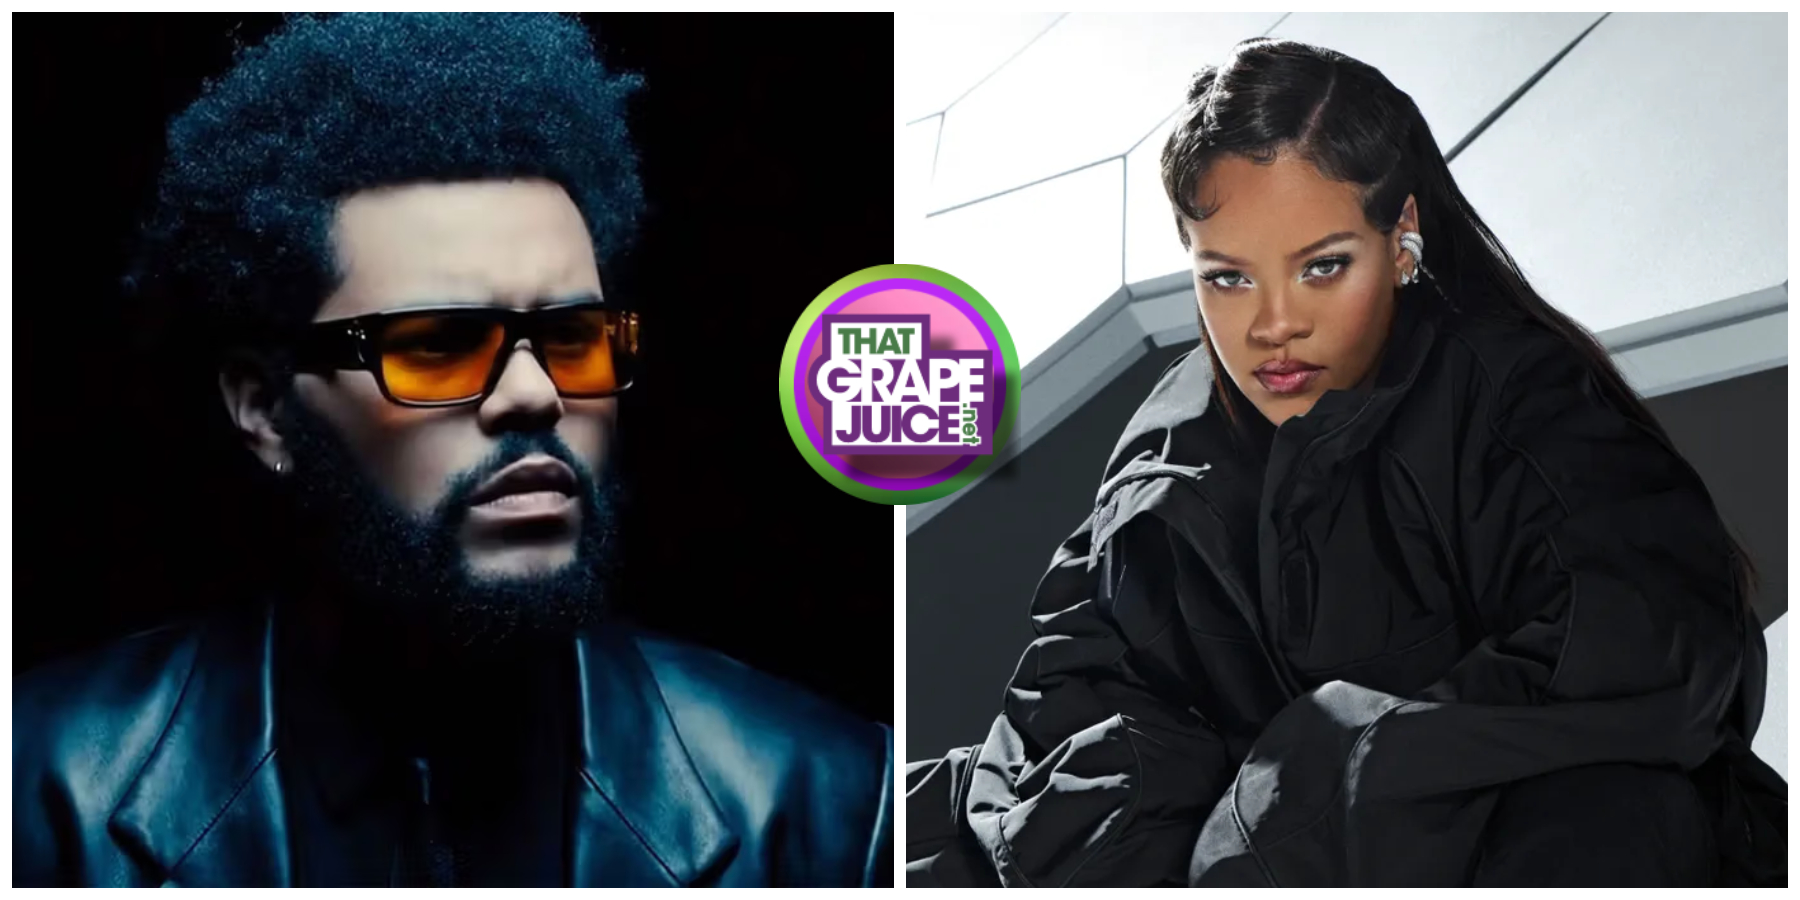 RIAA: The Weeknd Breaks Rihanna’s Record for Most Diamond-Certified Hits Among ALL Vocalists